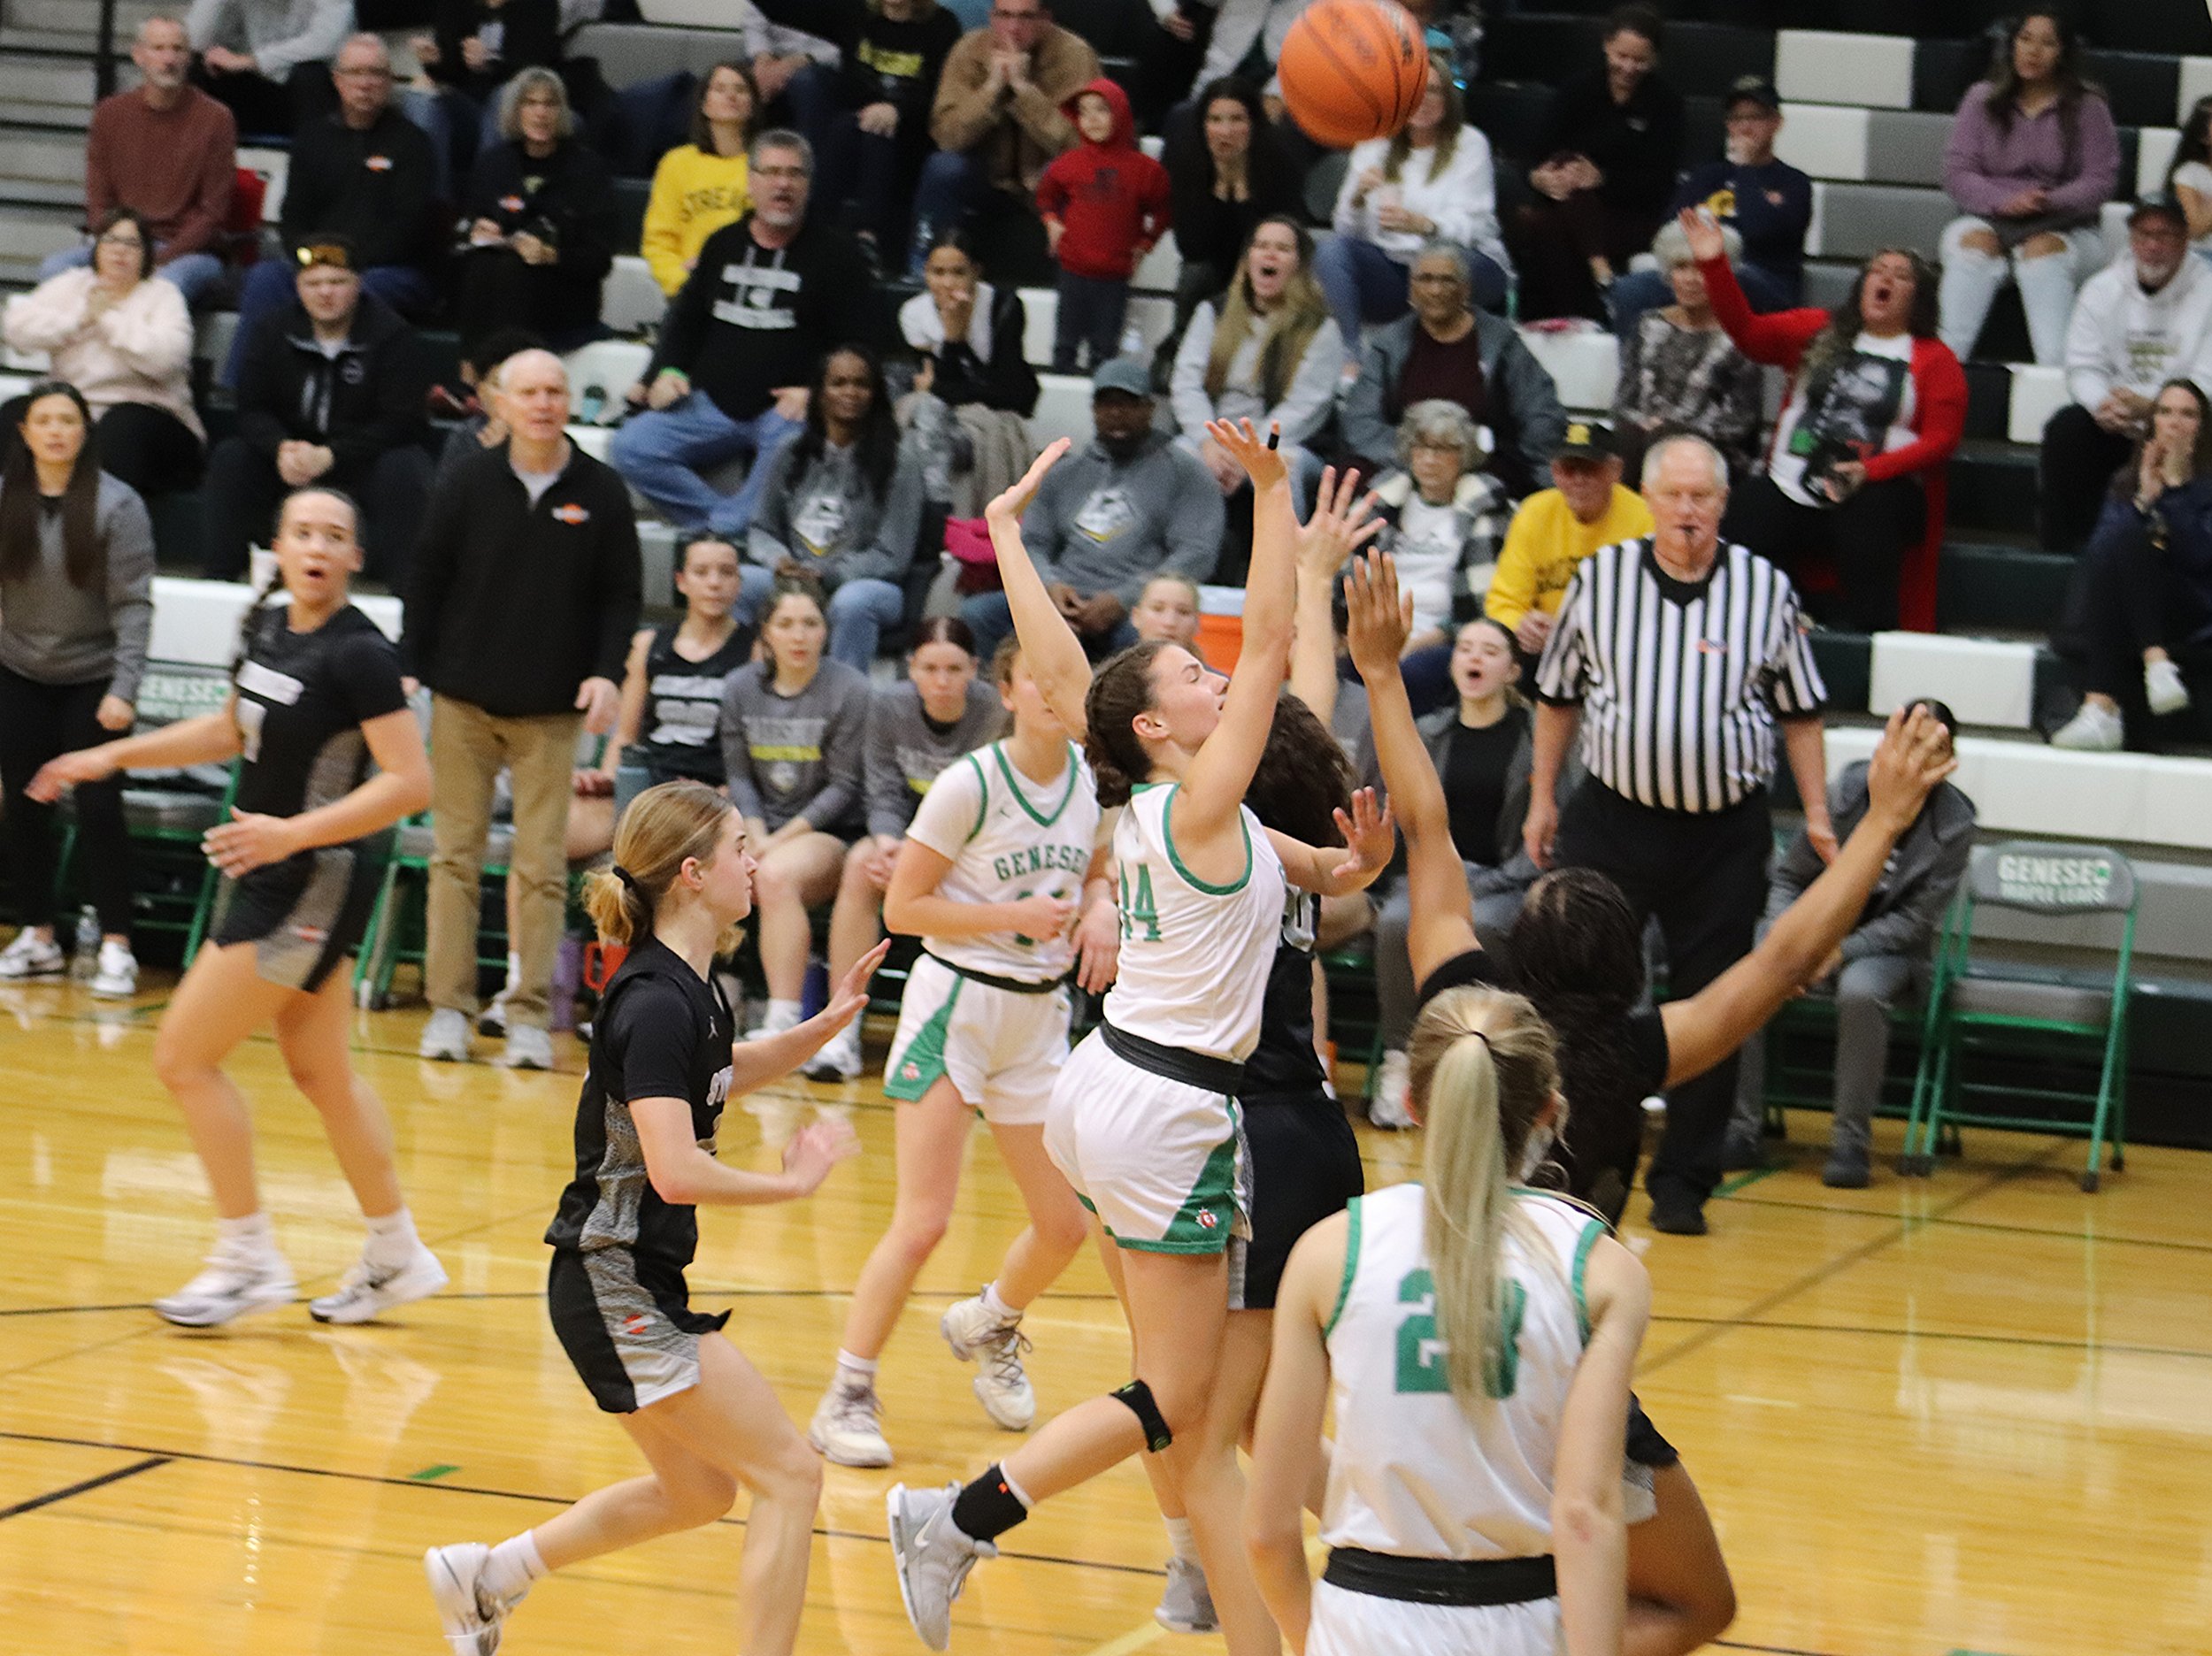 Lady Leafs Defeated Macomb 42-23